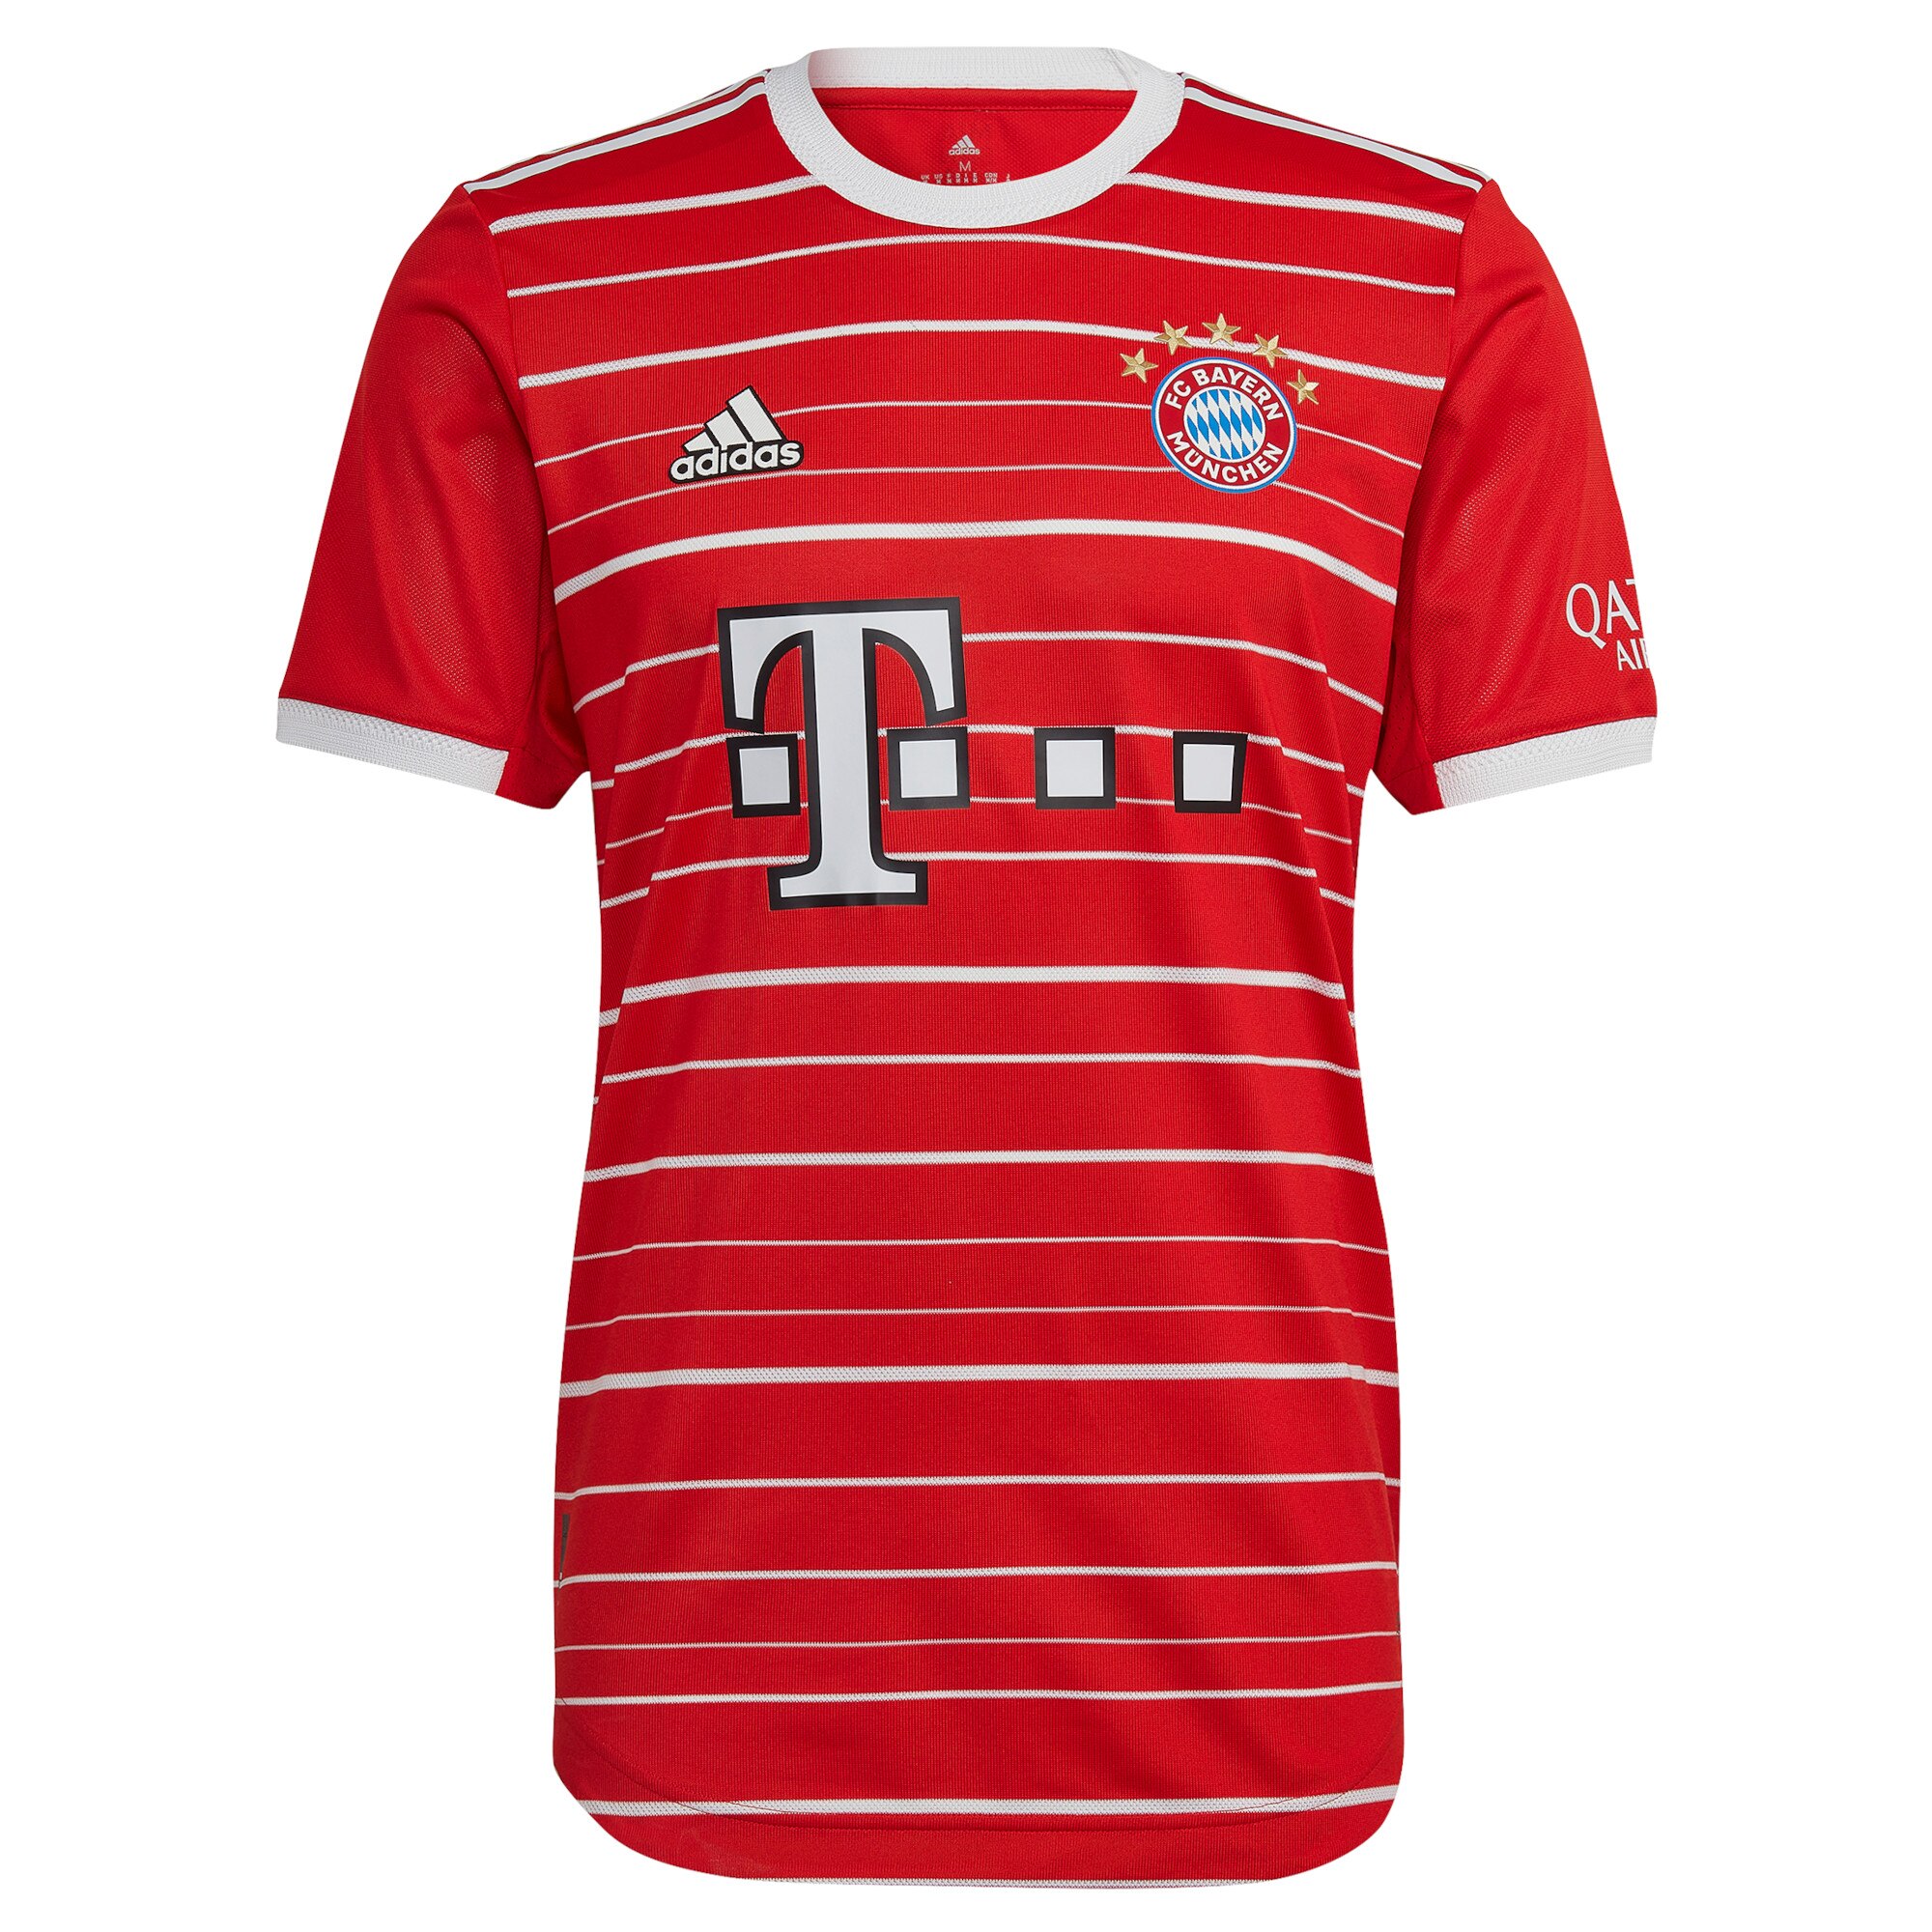 FC Bayern Home Authentic Shirt 2022-23 with Sarr 20 printing